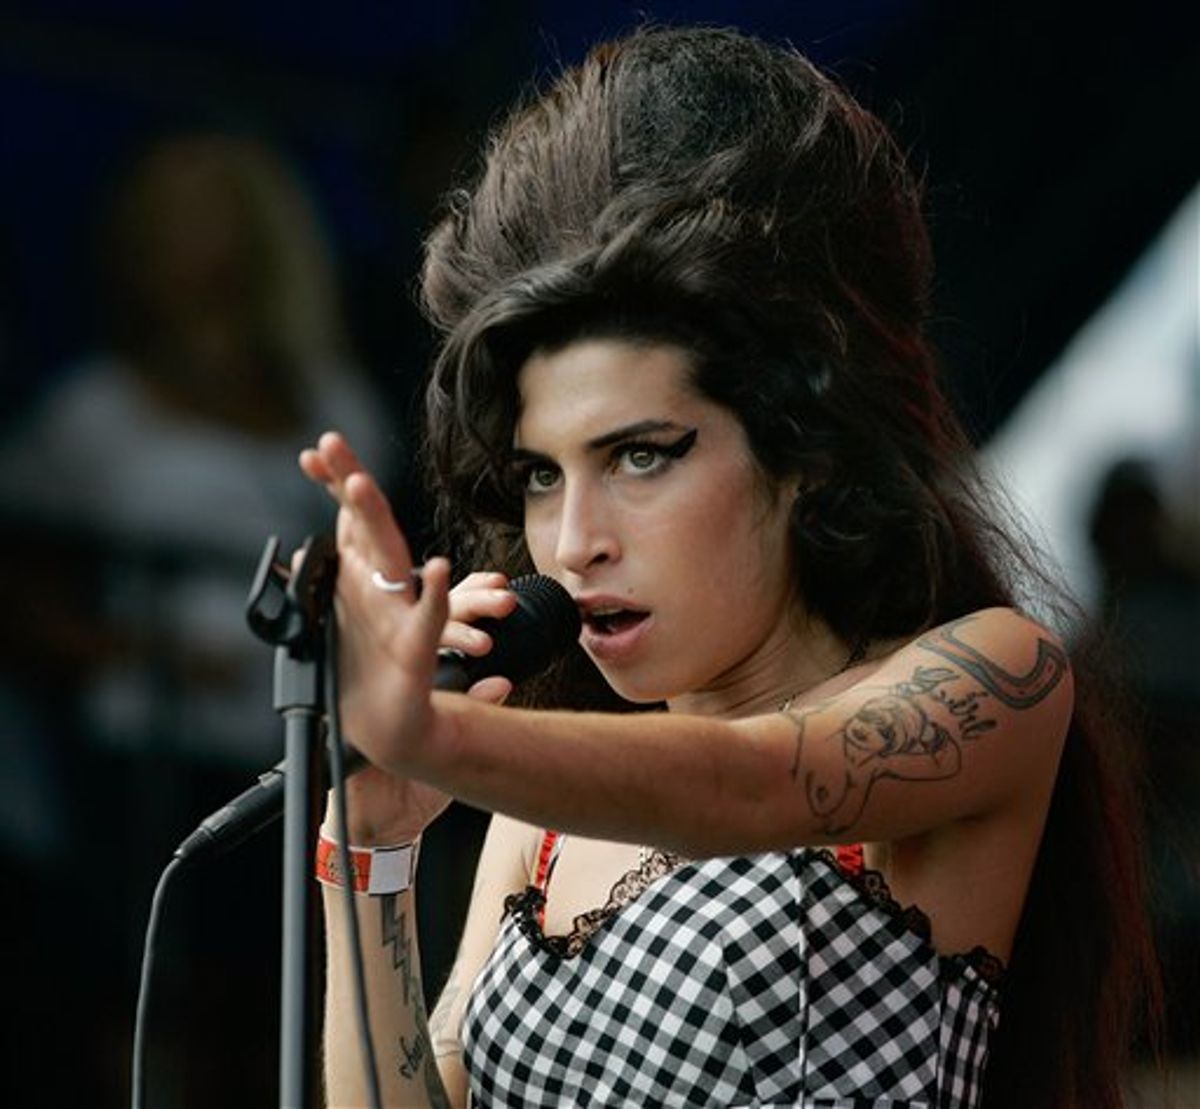 FILE - In this Aug. 5, 2007 file photo, British singer Amy Winehouse performs at Lollapalooza at Grant Park in Chicago. The singer was found dead Saturday, July 23, 2011, by ambulance crews who were called to her home in north London's Camden area. She was 27. (AP Photo/Brian Kersey, File)   (AP)